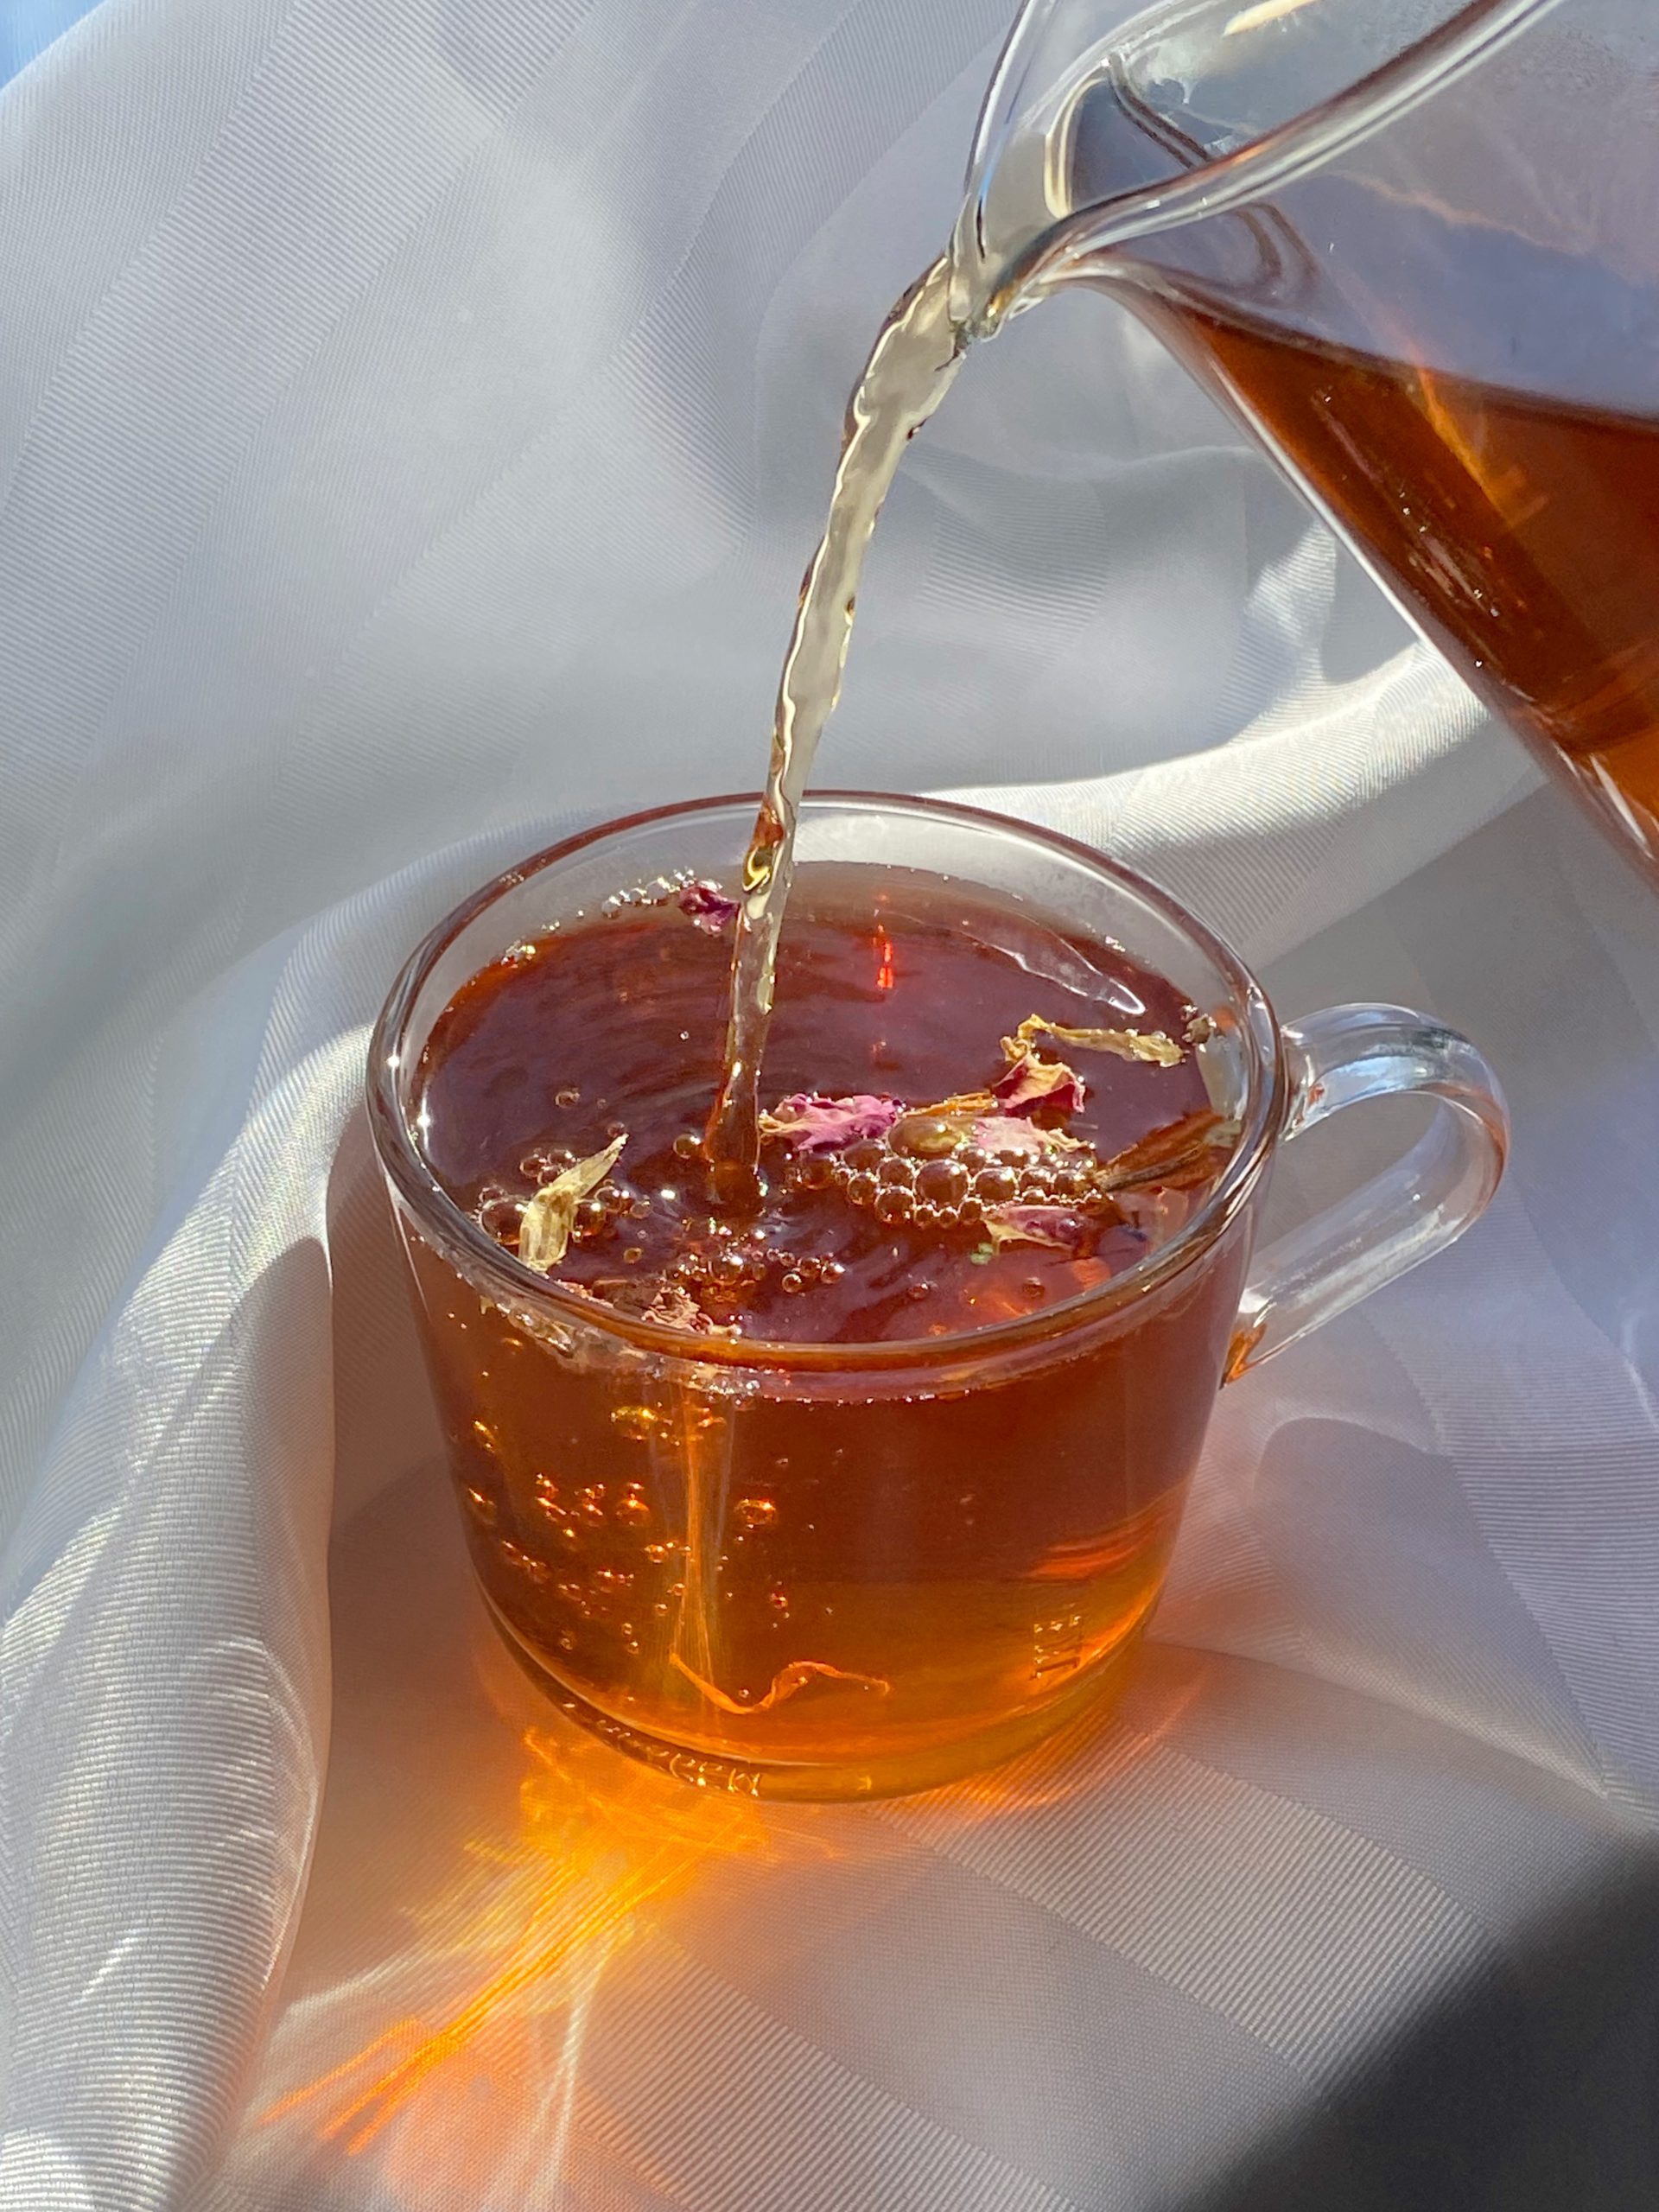 A rooibos loose leaf tea blend being pored delictely from a glass pitcher into a glass mug. Rose petals sit on top of the tea and small bubbles appear as the tea pours. The sun shines through the pouring tea to cast light and shadows on the surrounding soft white sheet. T. Kettle Loose Leaf Tea: Premium Quality, Environmental Responsibility, Social Equity.